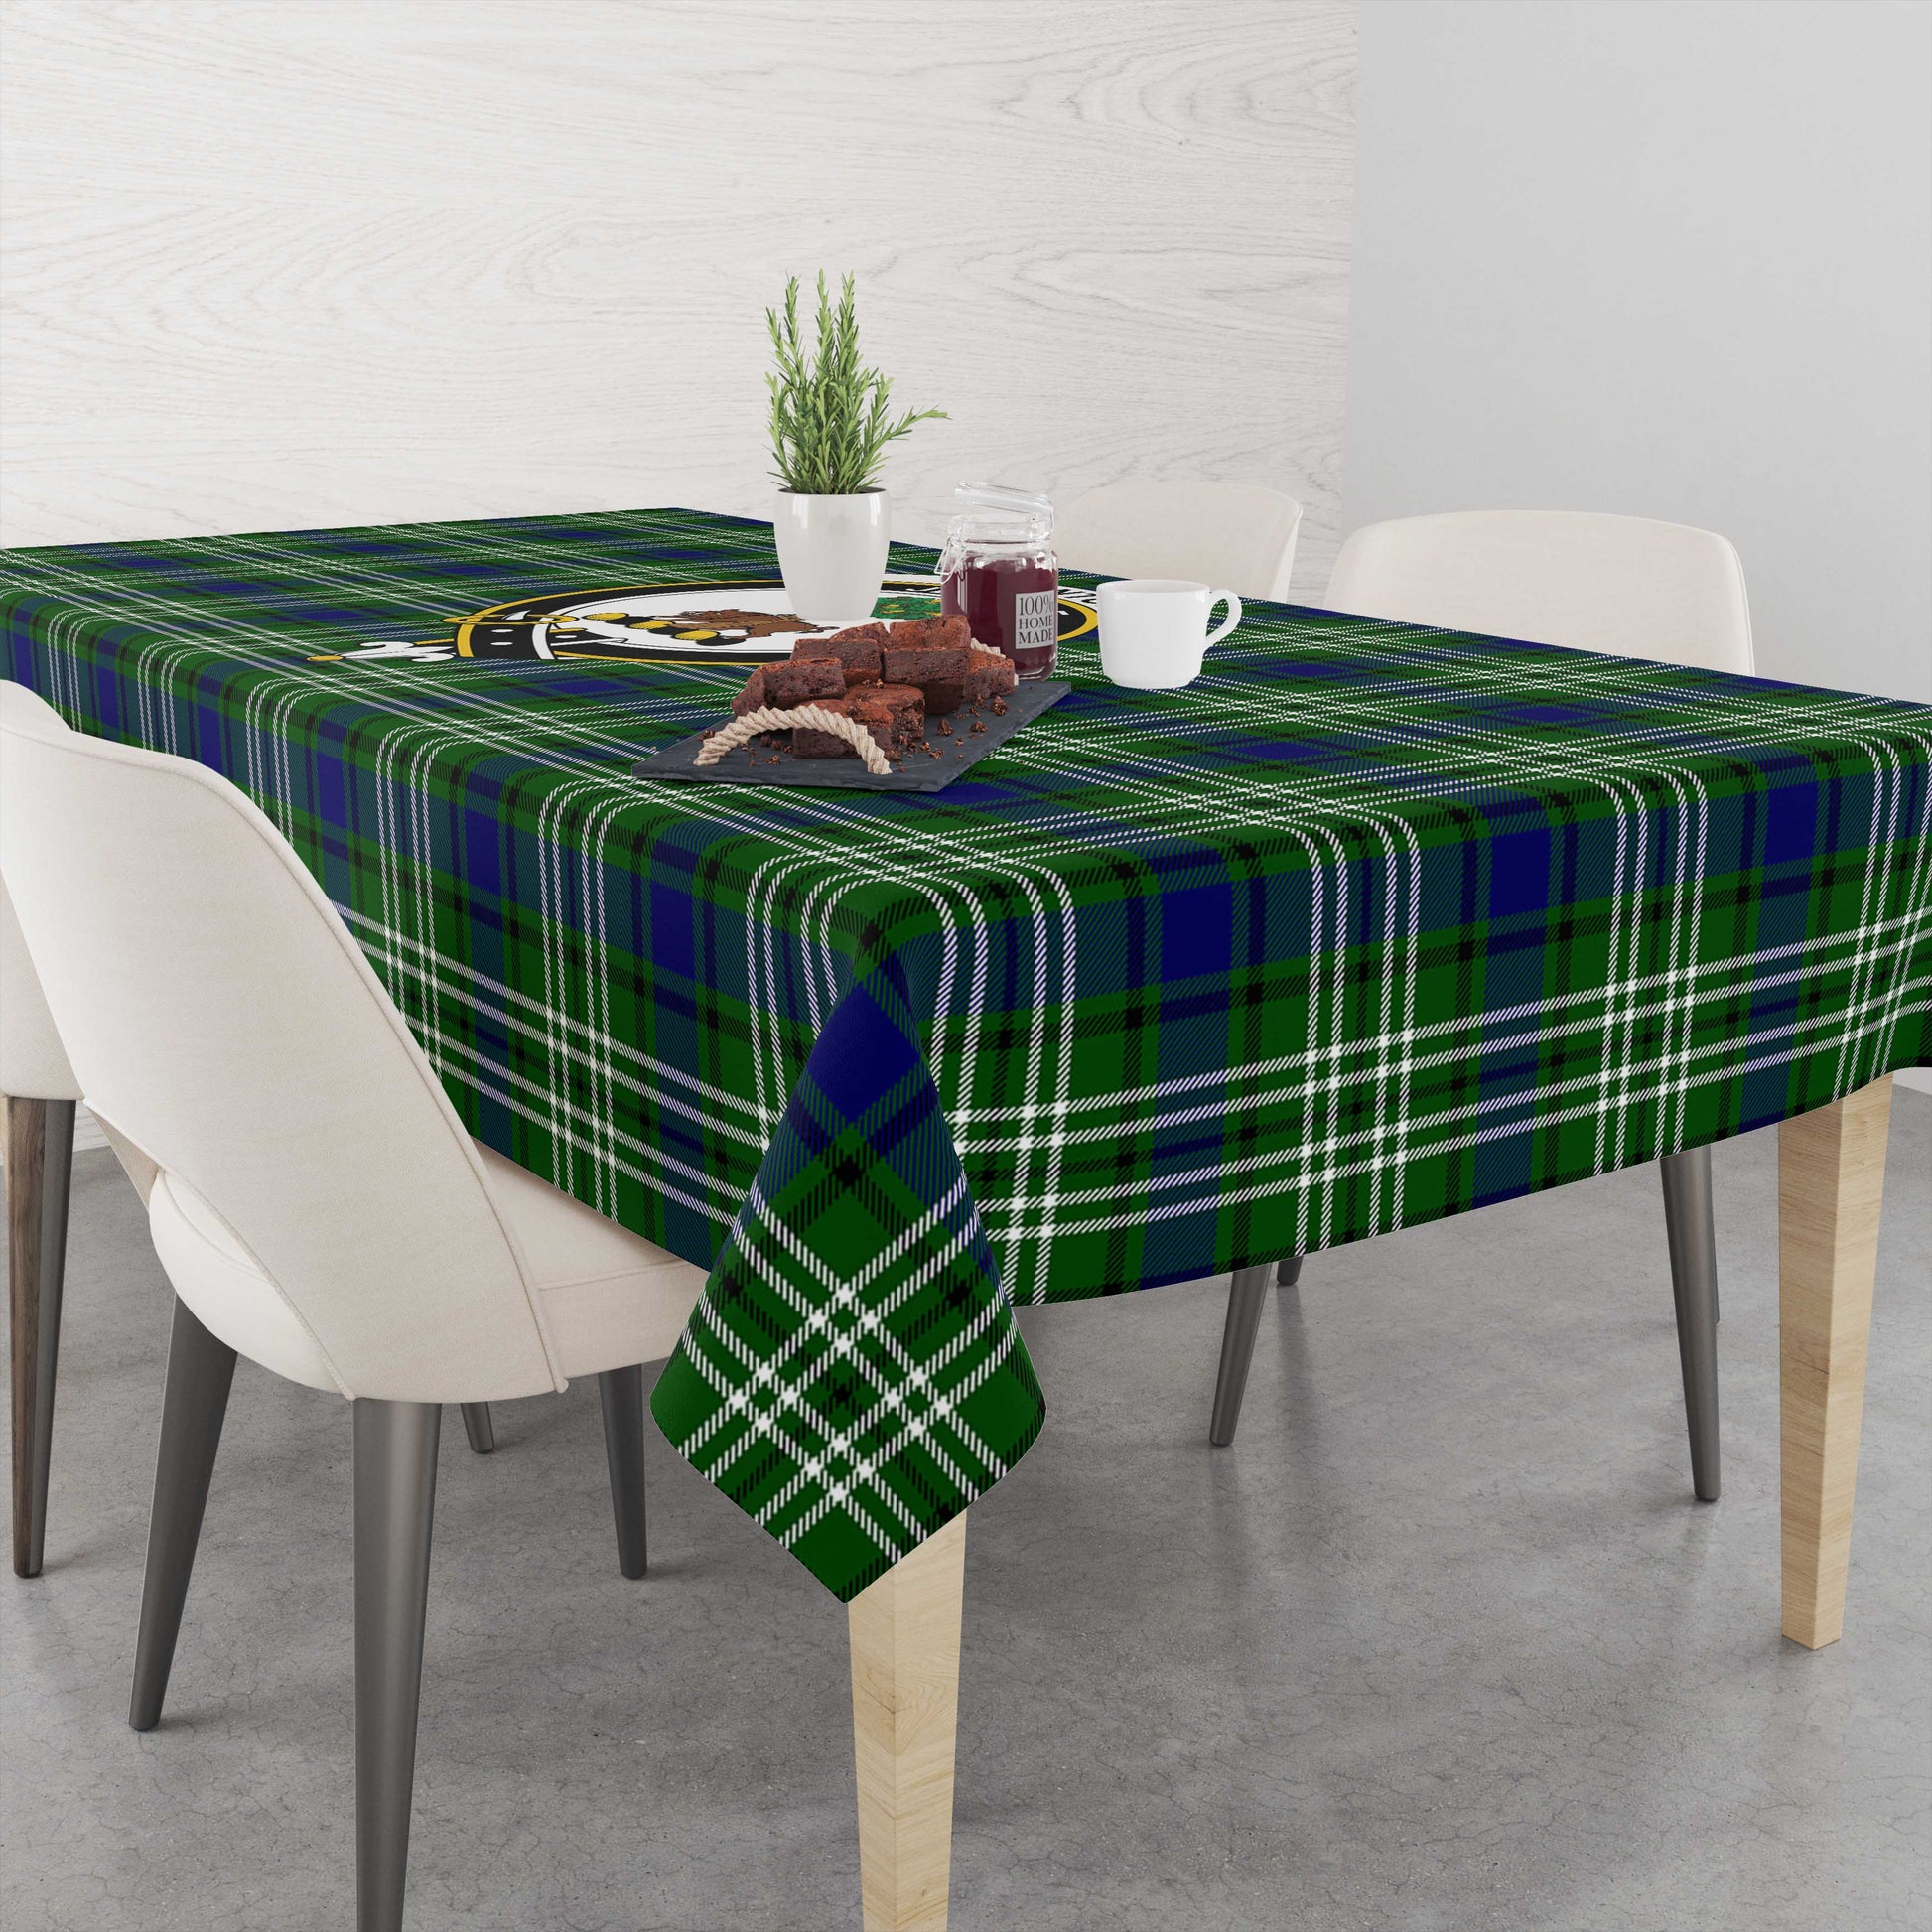 swinton-tatan-tablecloth-with-family-crest